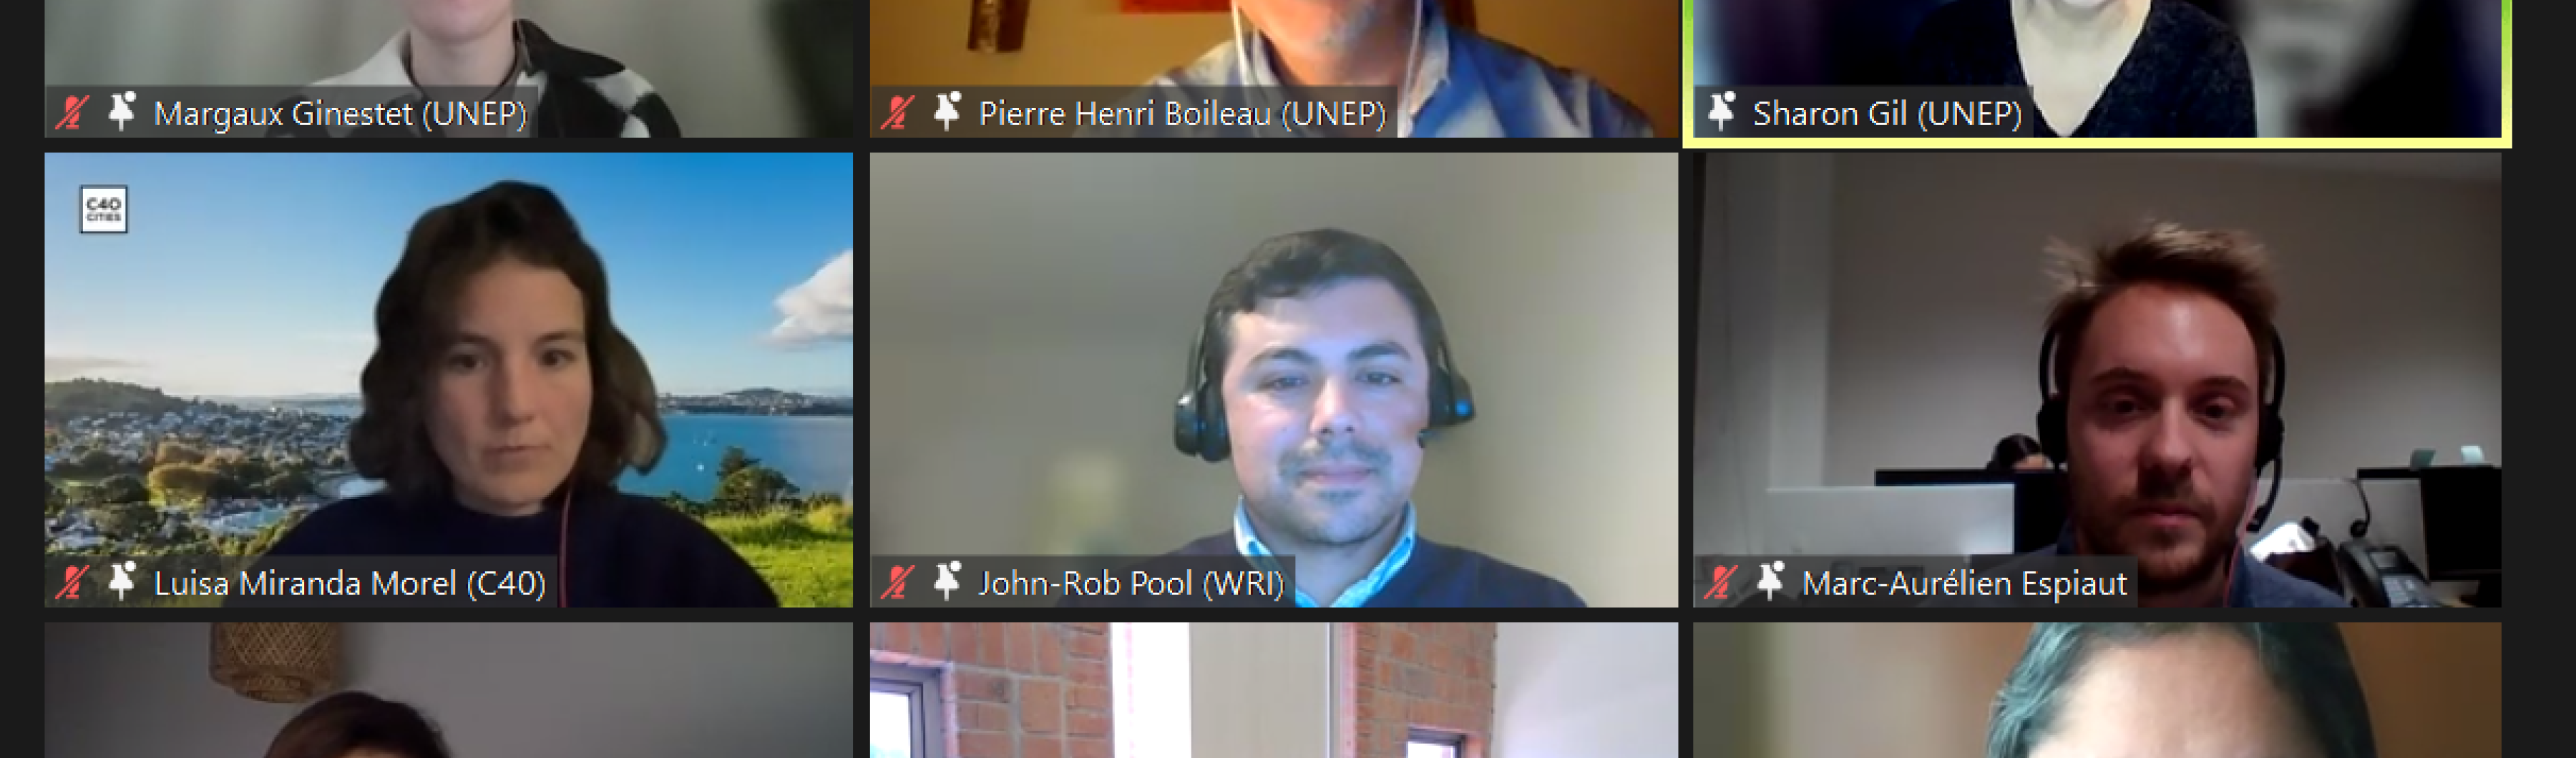 Panelists and organizers at the webinar